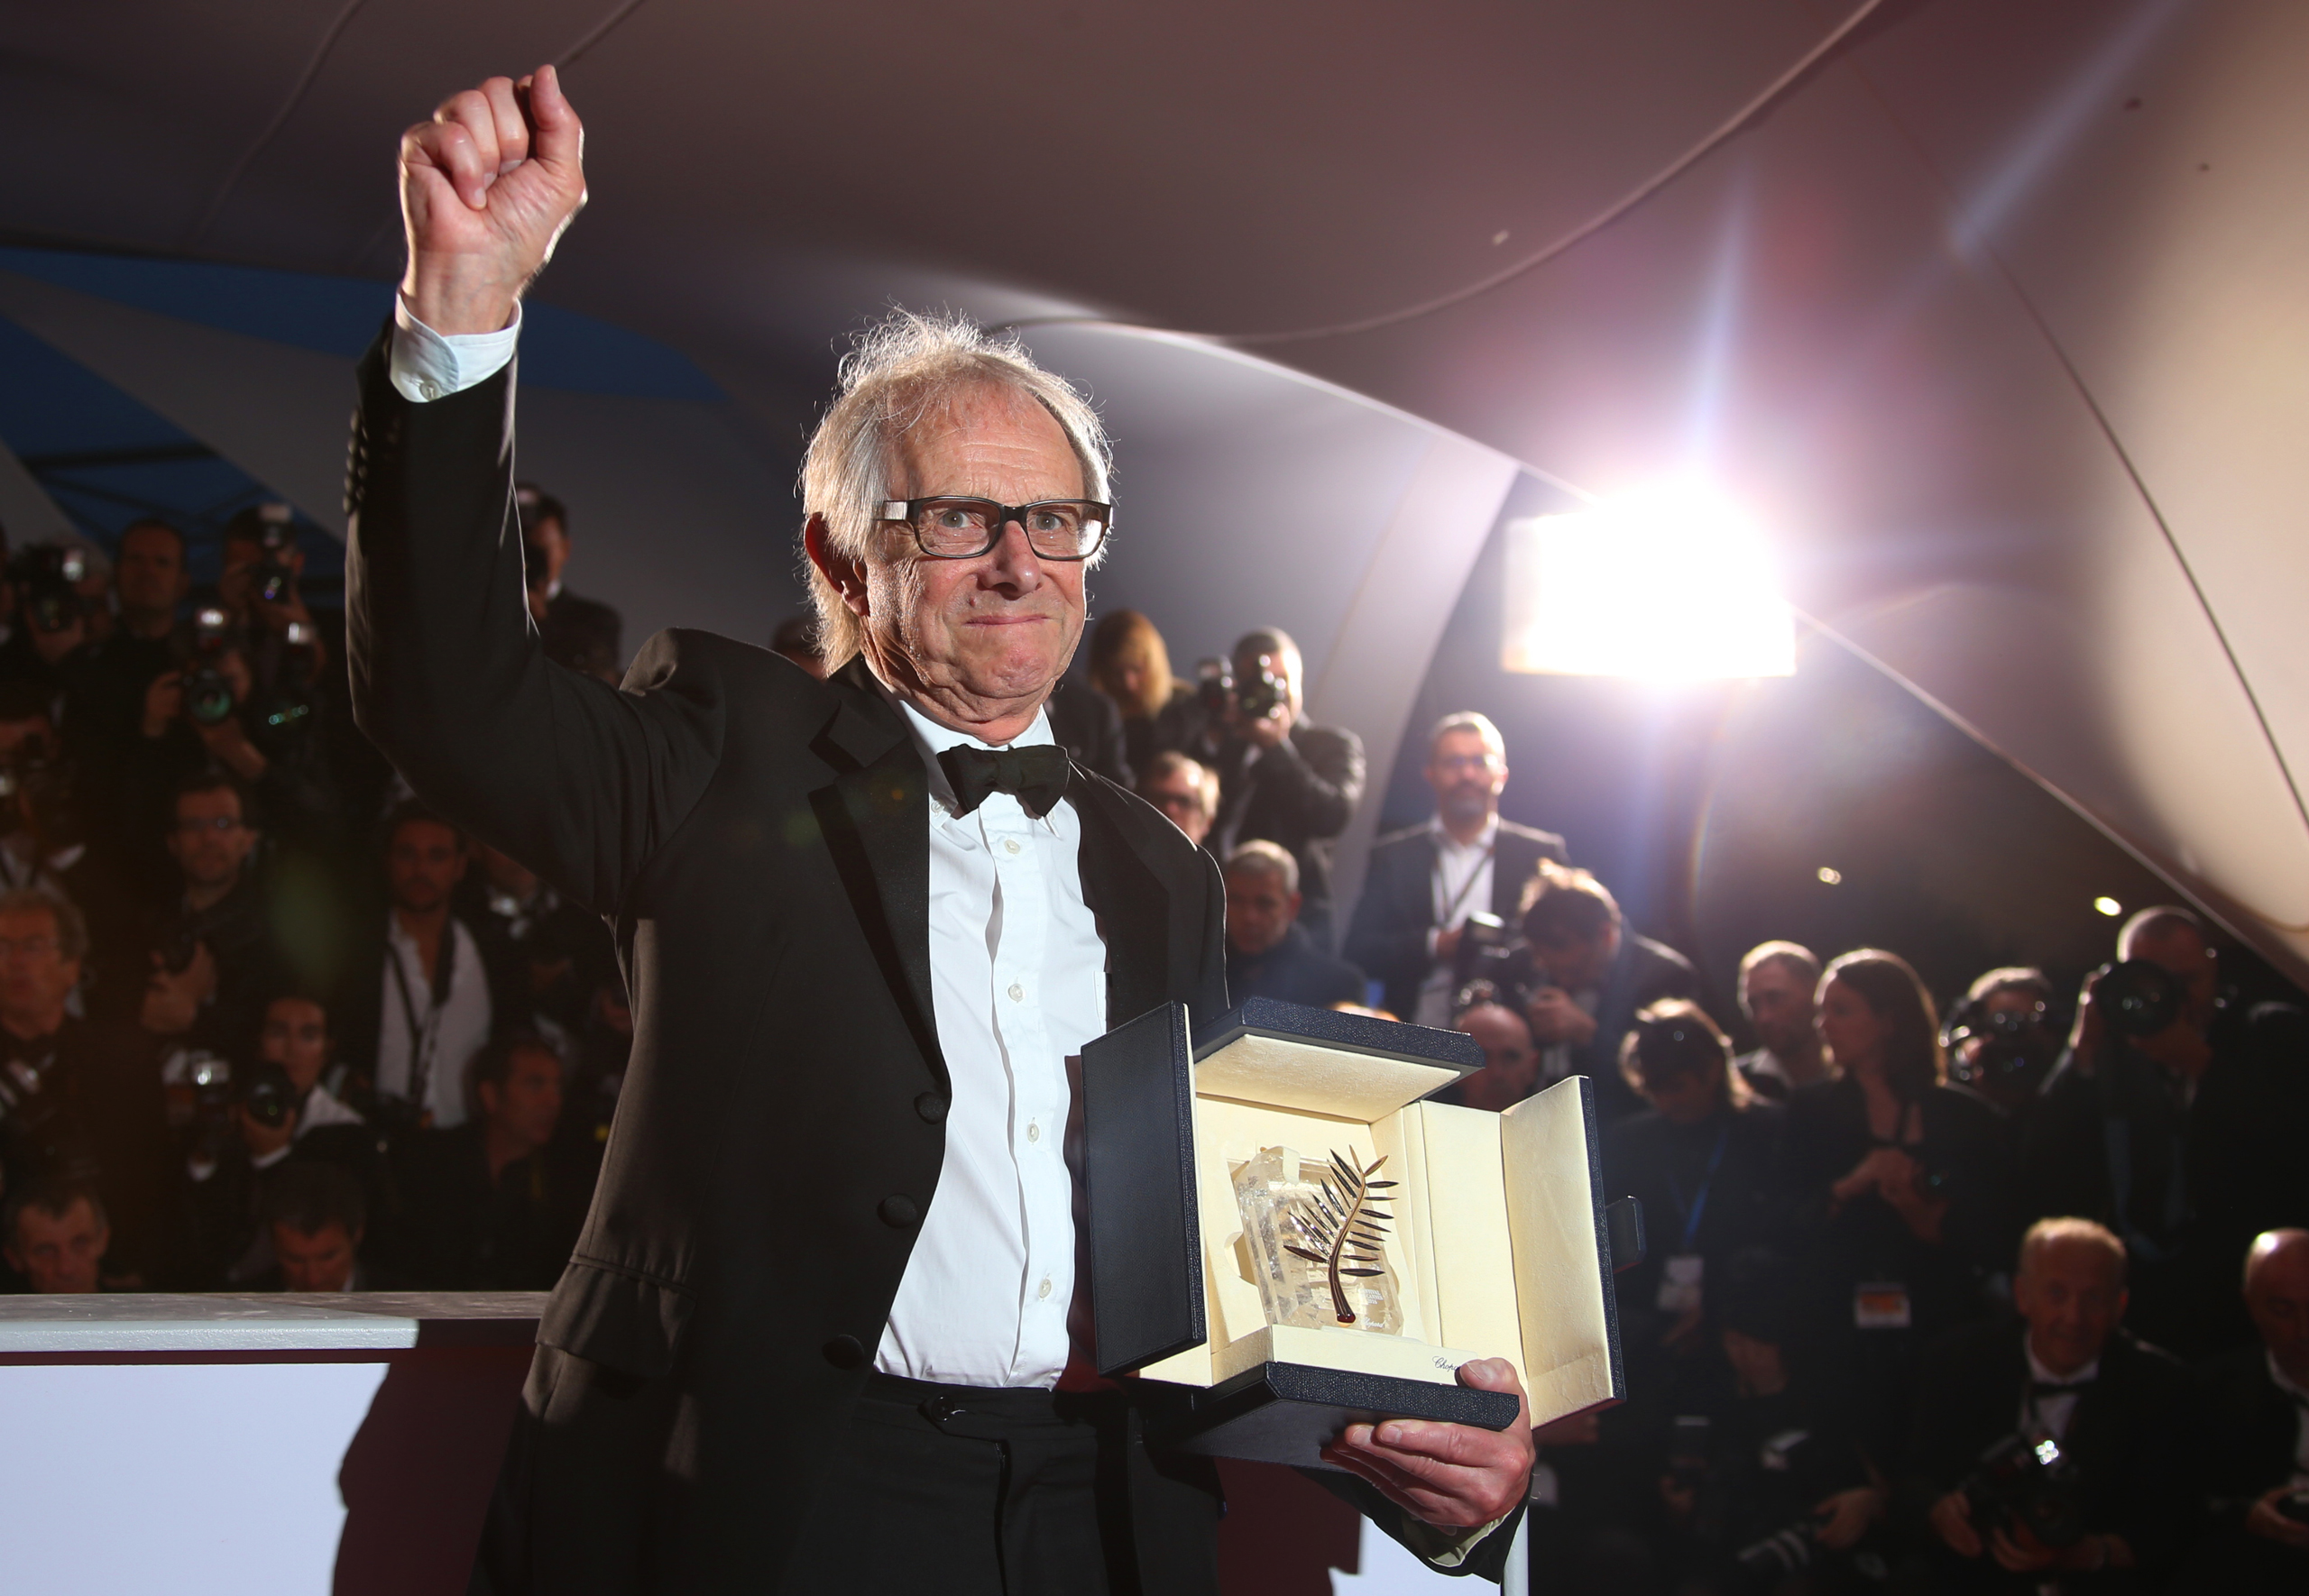 Director Ken Loach poses for photographers with the Palme d'Or for his film I, Daniel Blake during the photo call following the awards ceremony at the 69th international film festival, Cannes, southern France, Sunday, May 22, 2016. (AP Photo/Joel Ryan)